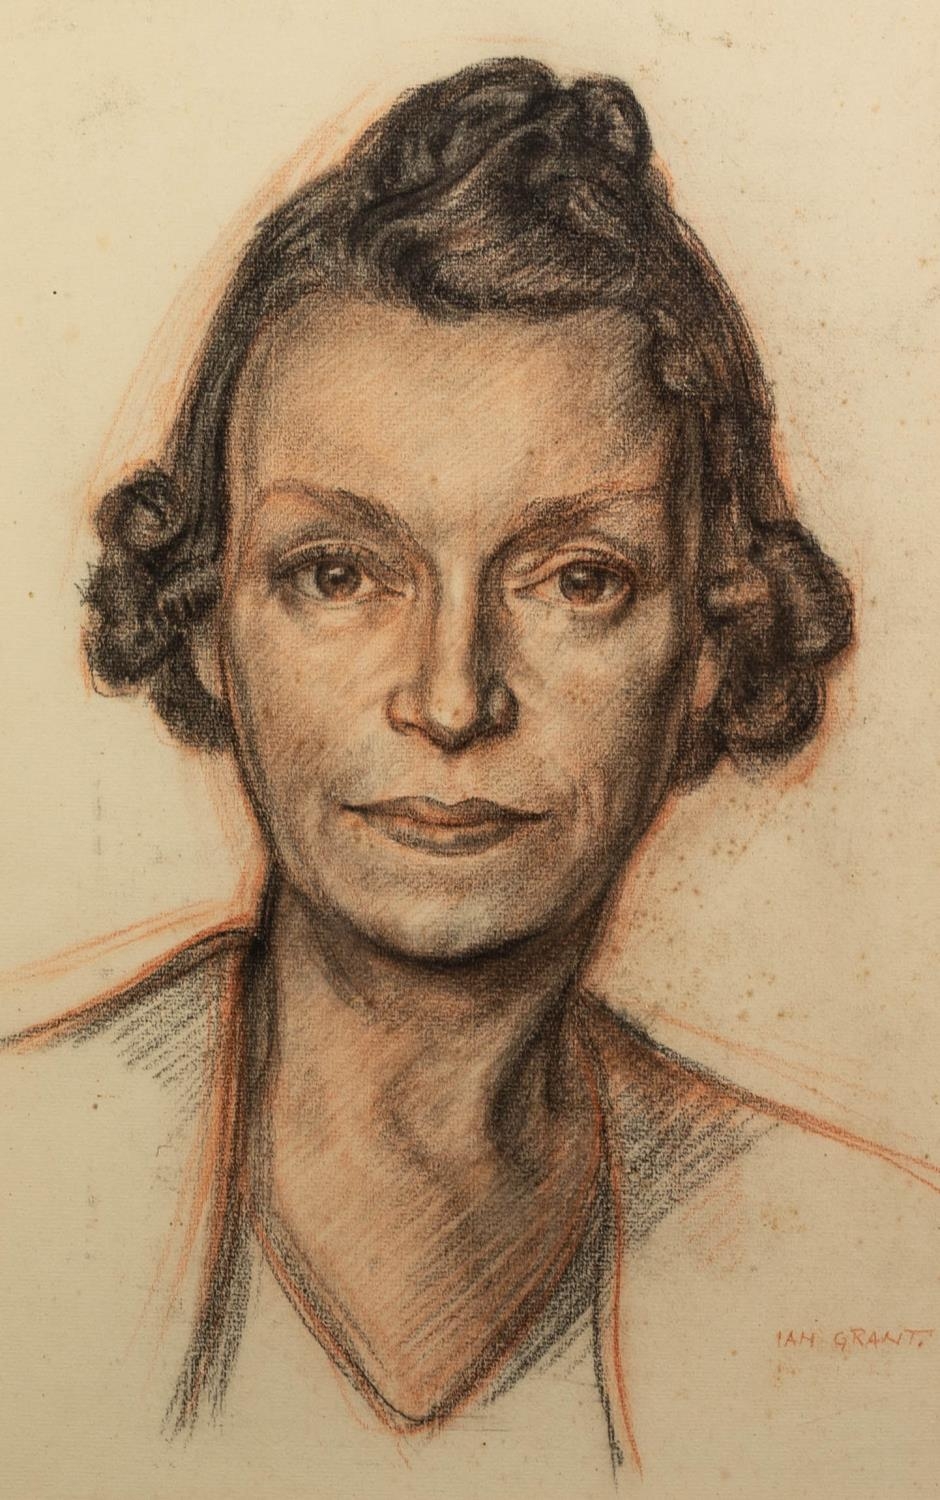 IAN GRANT (1904 - 1993) CONTE CRAYON DRAWING The Artist's Mother, bust portrait Signed lower right